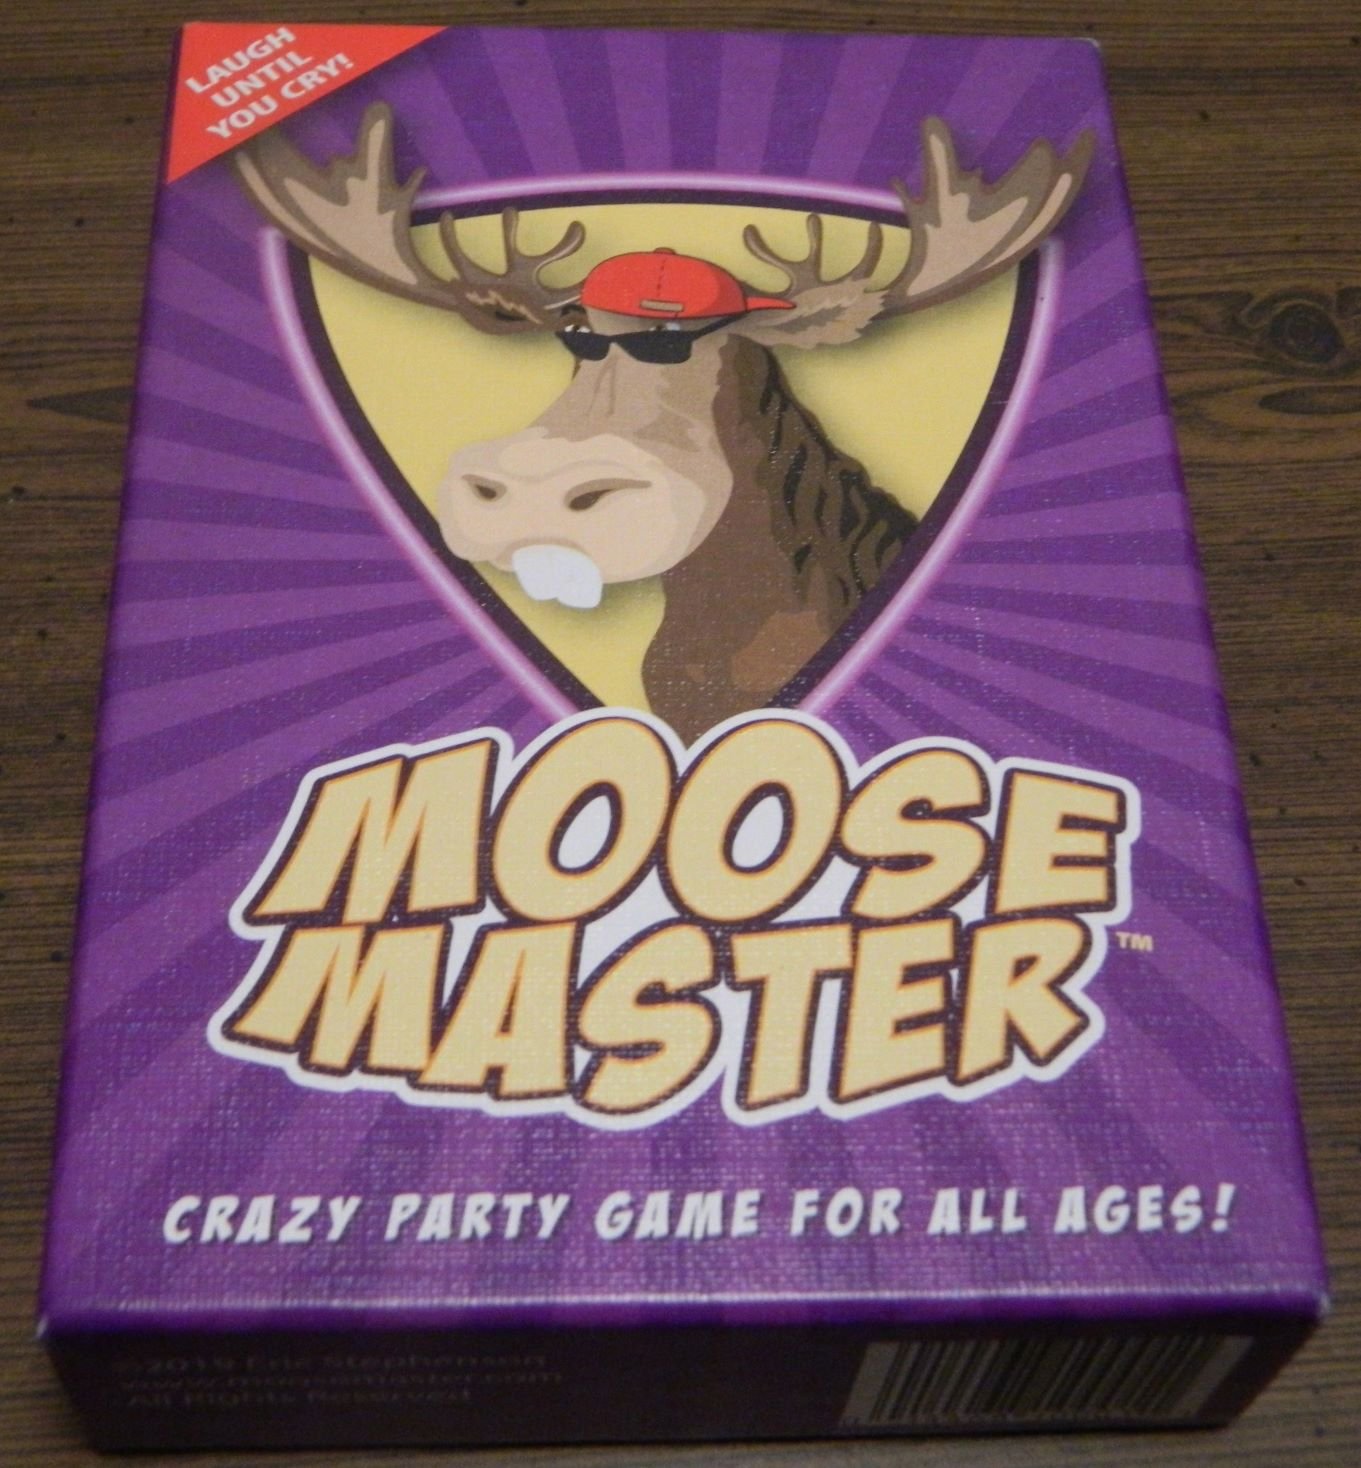 Moose Master Card Game Review and Rules